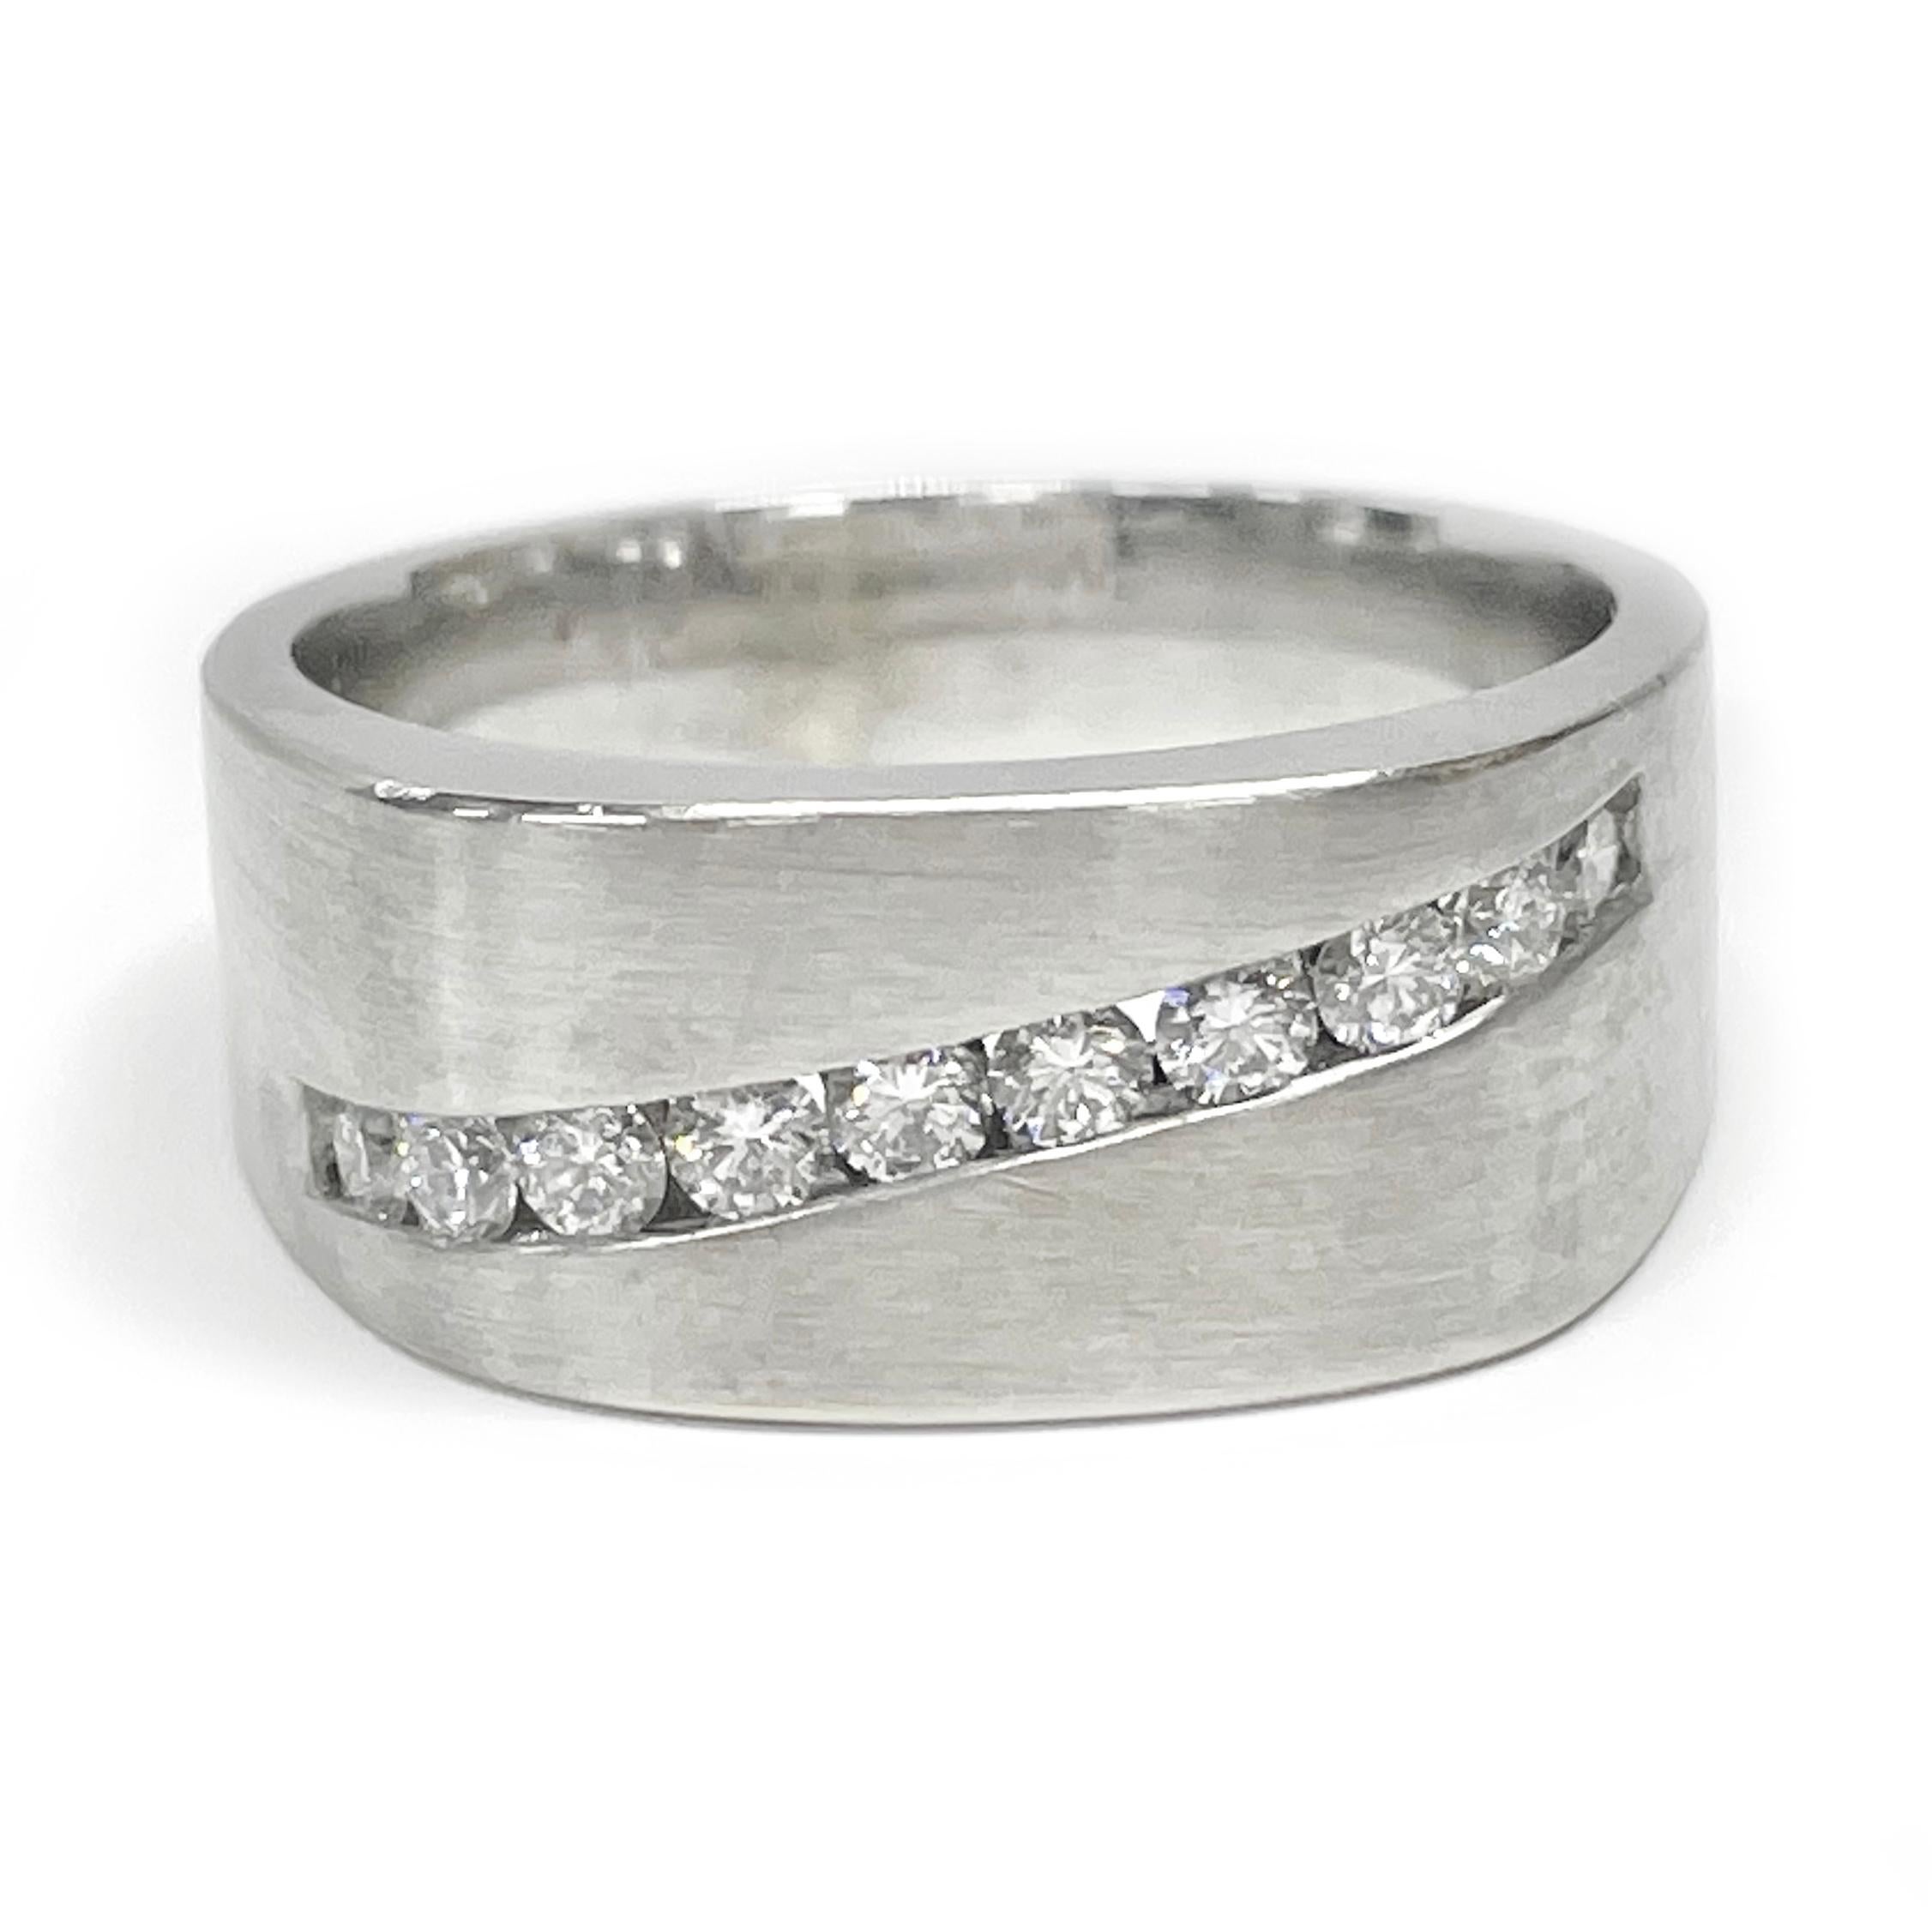 Gentleman’s 18 Karat White Gold Solid Channel Set Diamond Ring. The ring has a sleek satin finish on the face and front of the band with ten round brilliant-cut diamonds channel-set on the front wrapping around slightly to the sides. The diamonds